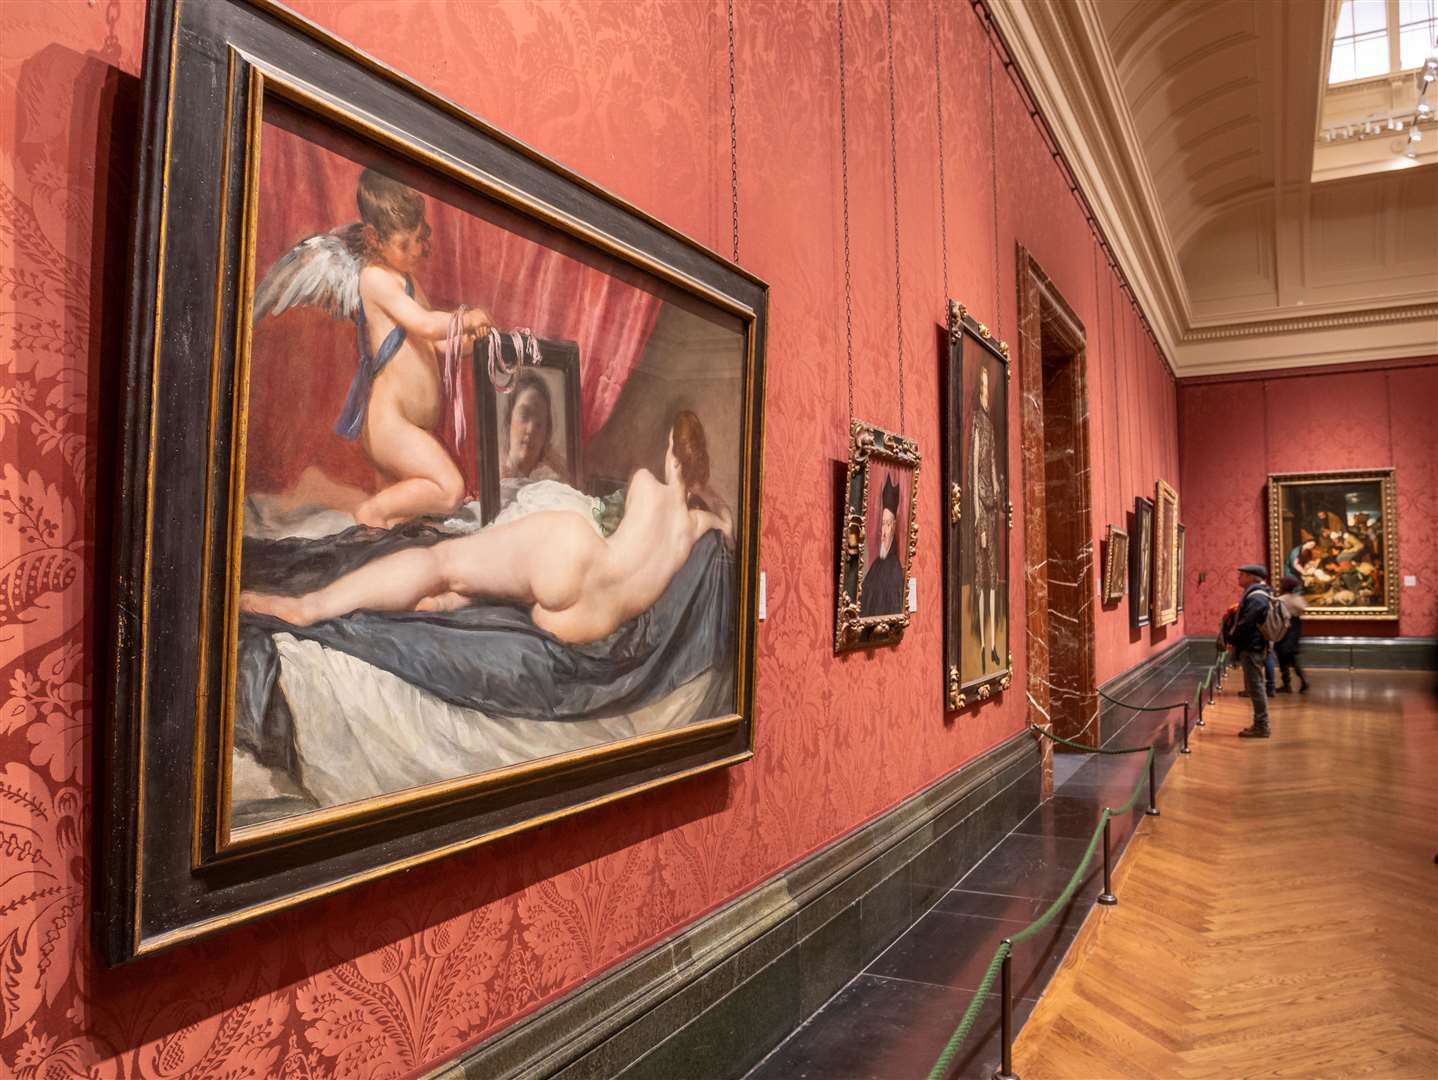 The Rokeby Venus painting in the National Gallery was targeted by Just Stop Oil protesters (Alamy/PA)